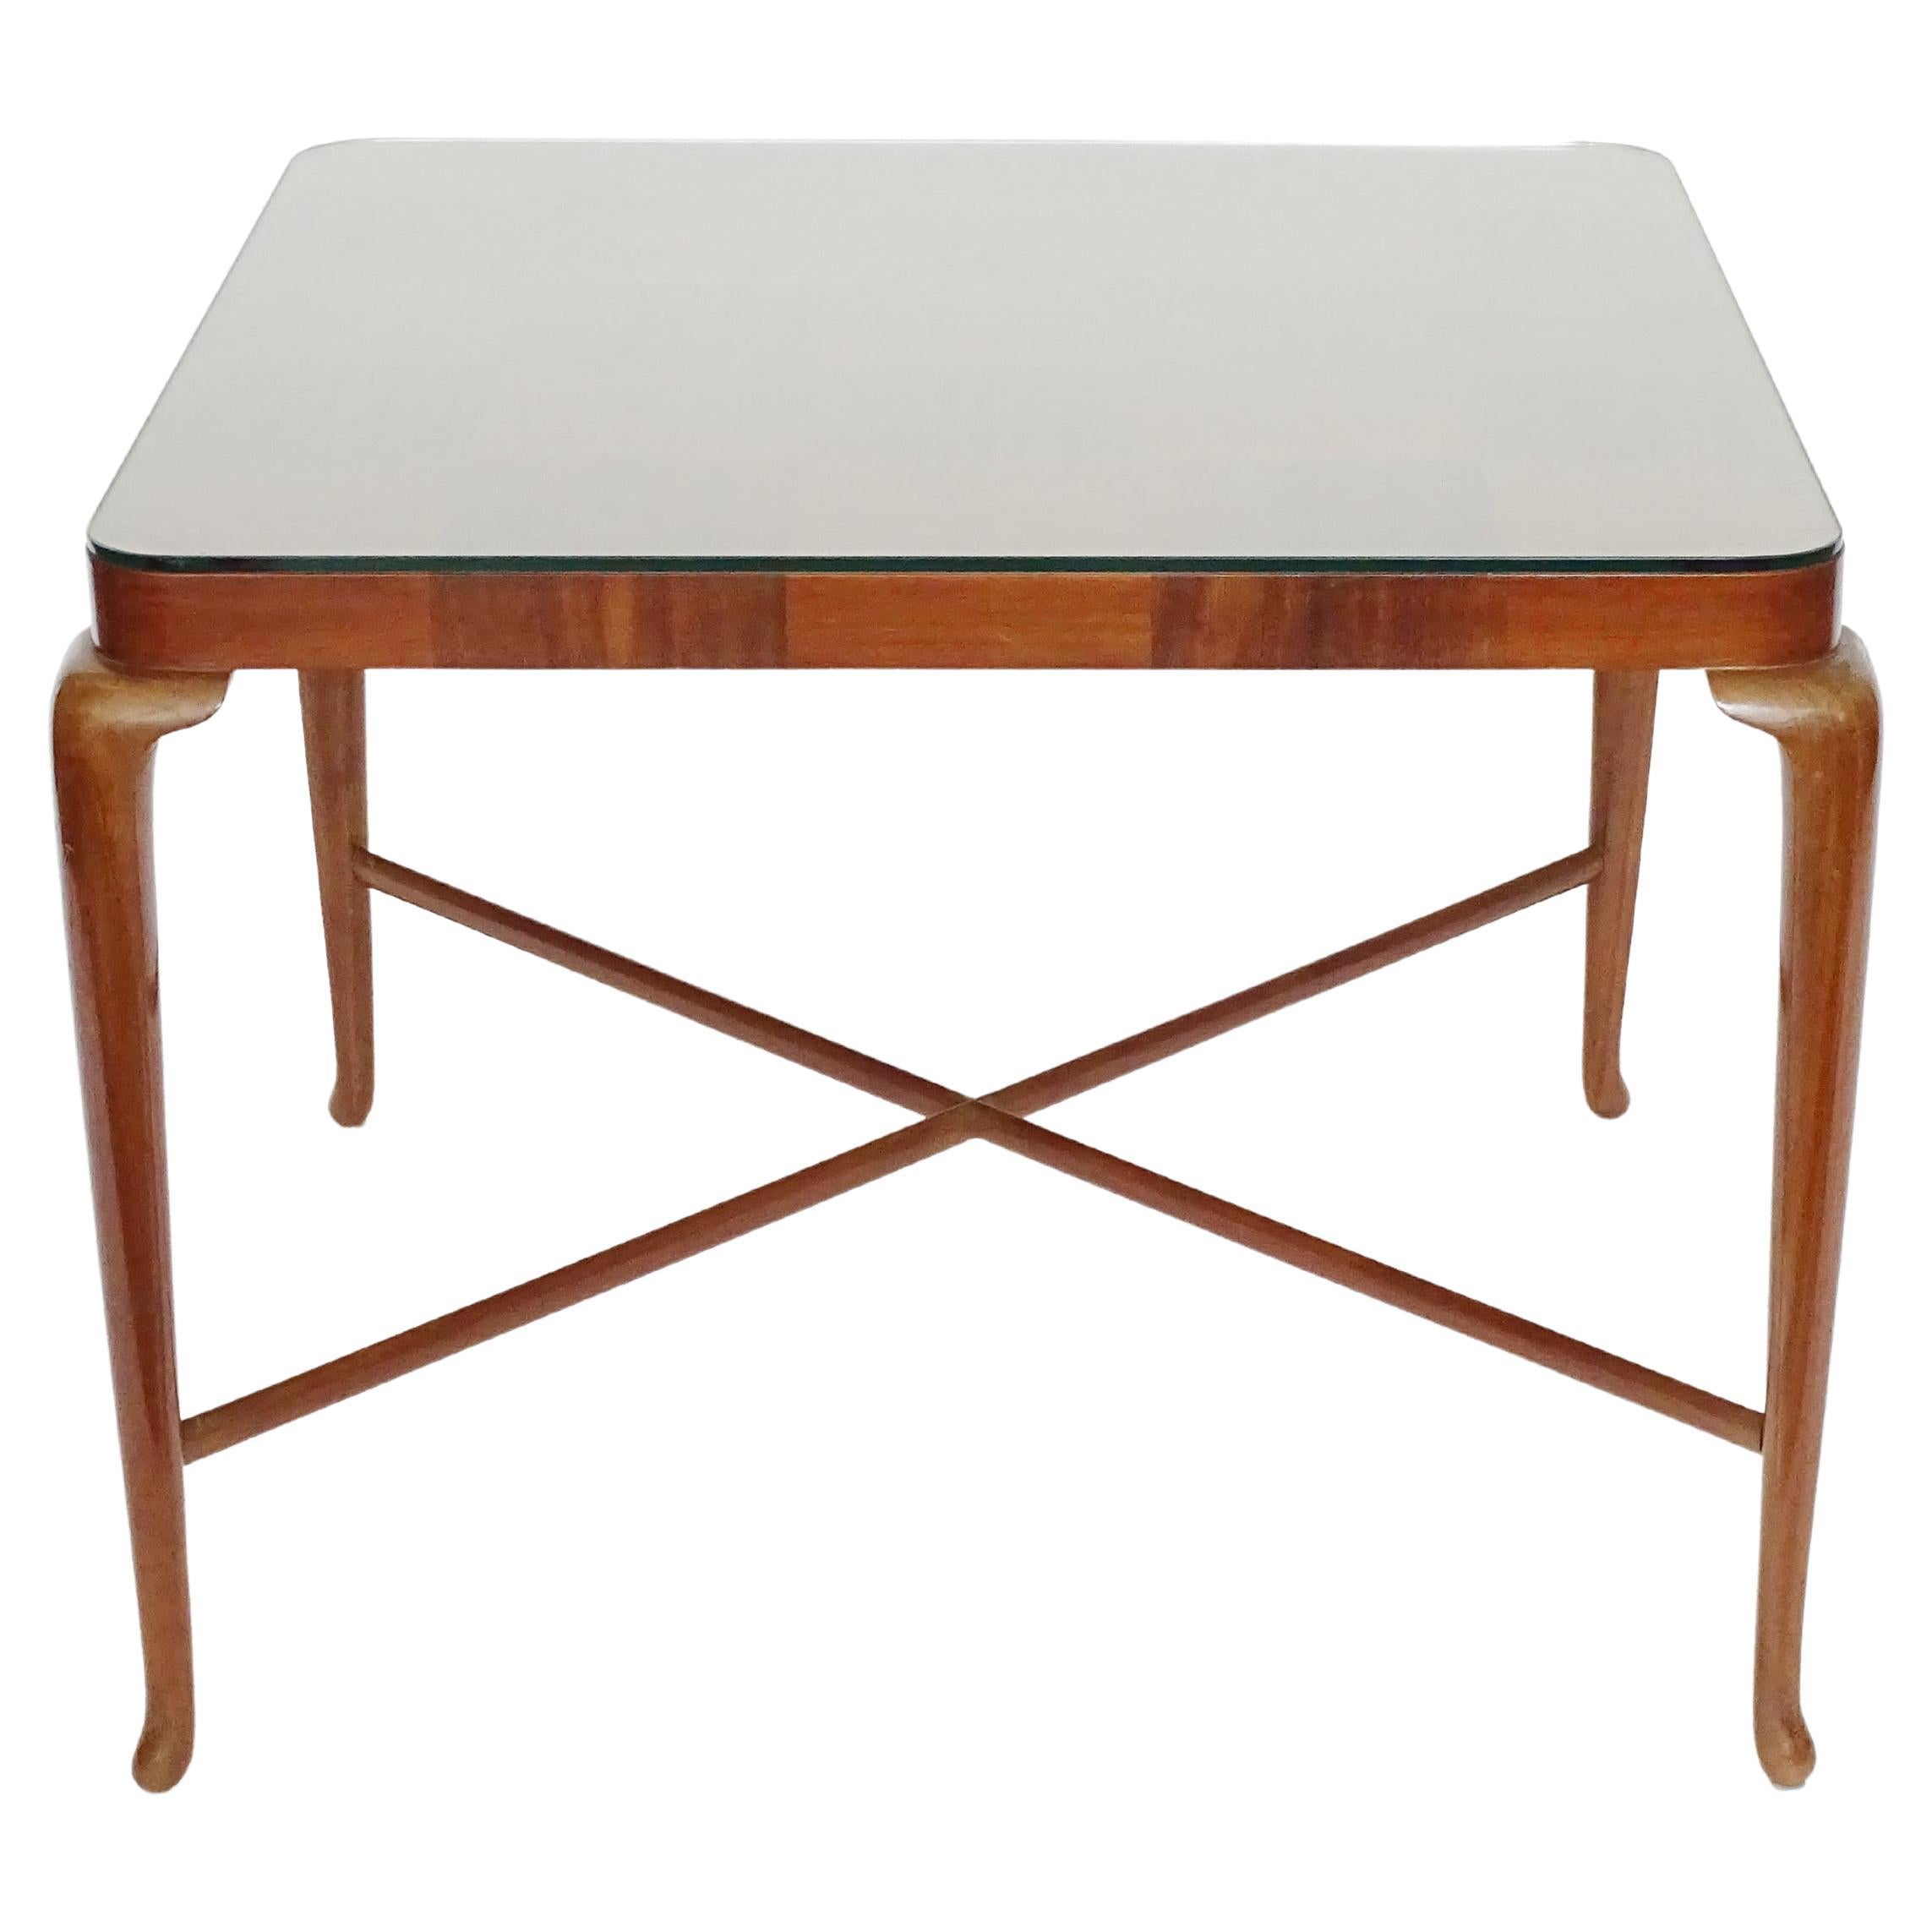 Paolo Buffa Wooden Coffee Table with Squares Top, Italy, 1940s For Sale